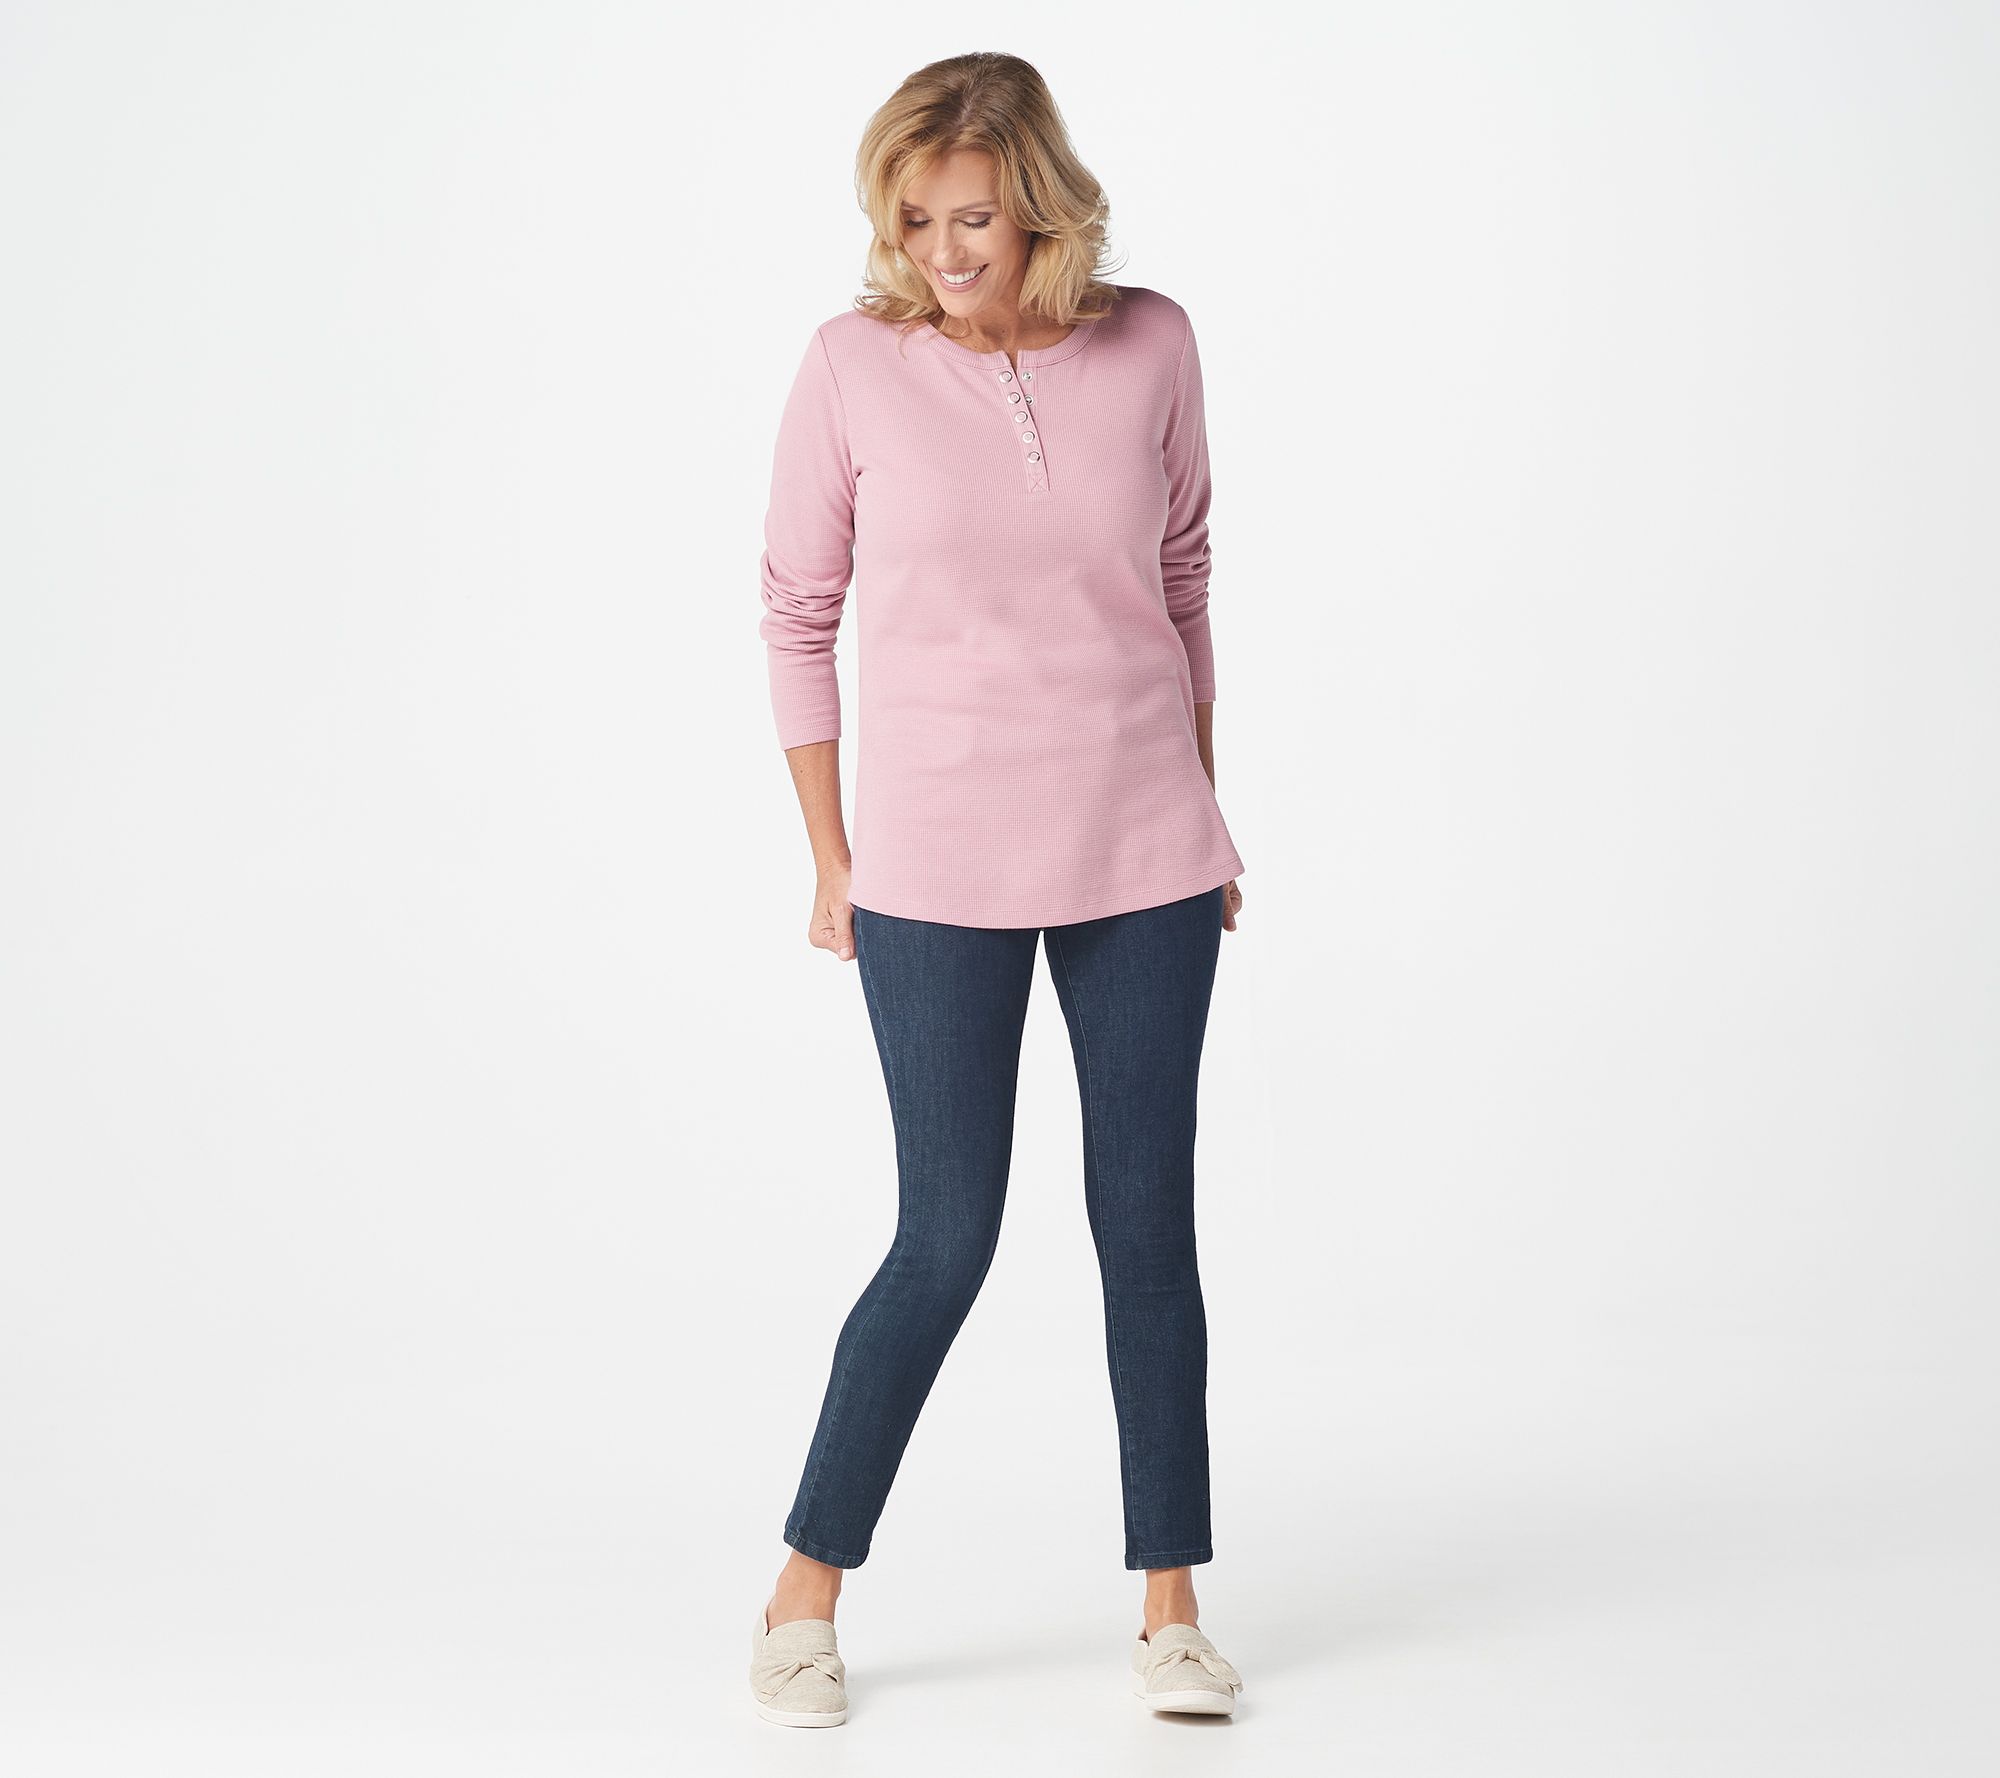 Denim & Co. Essentials Waffle Knit Henley Top with Curved Hem - QVC.com